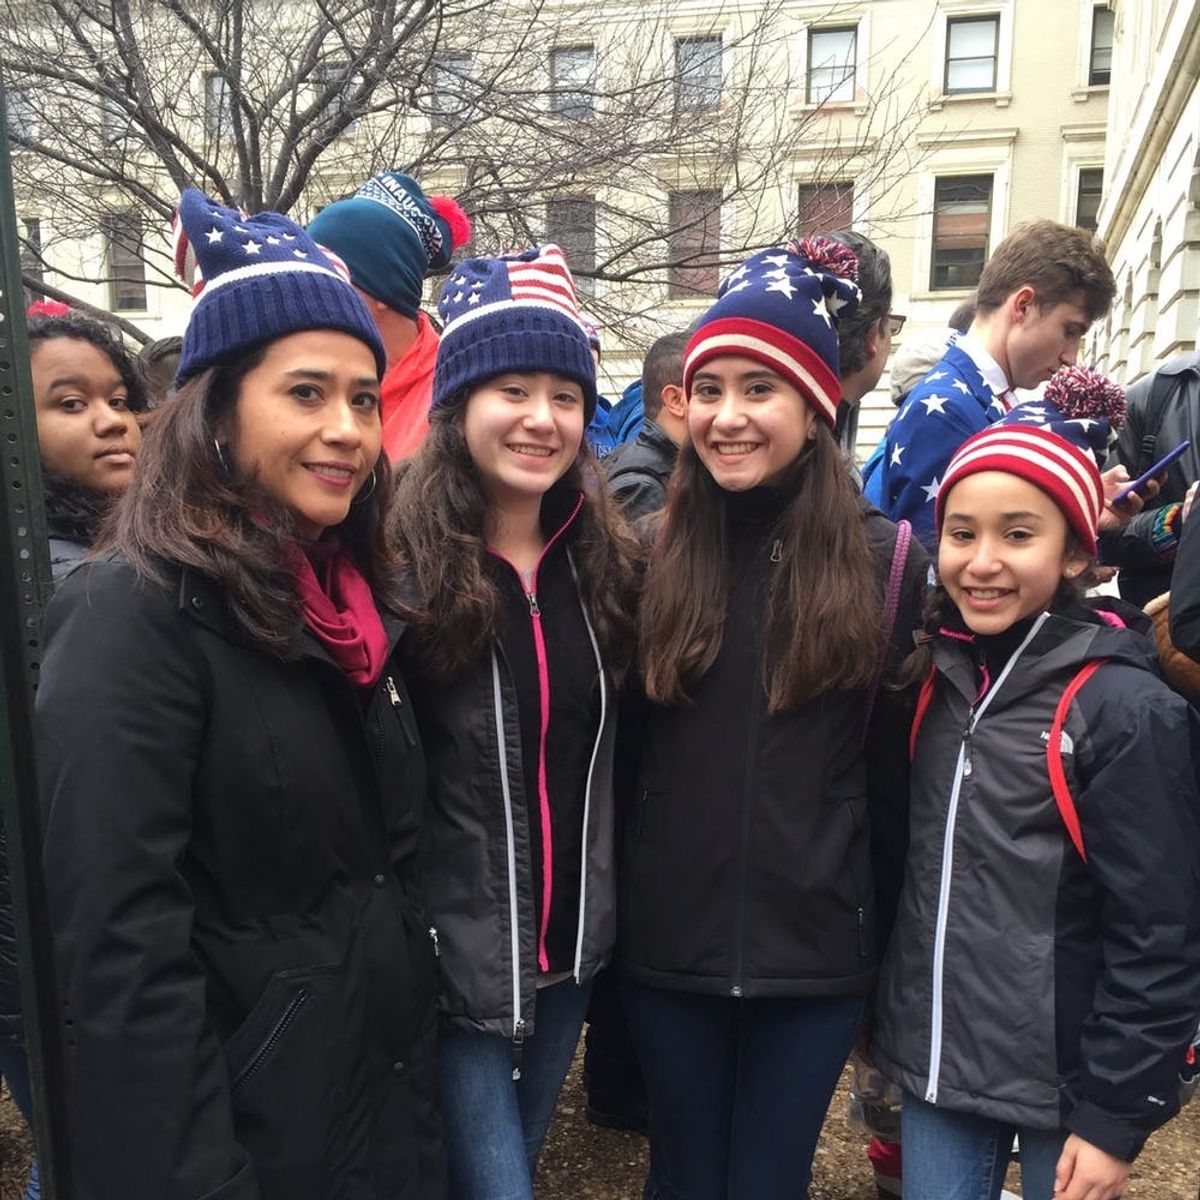 These Inauguration Attendees Tell Us Why They Showed Up for Trump